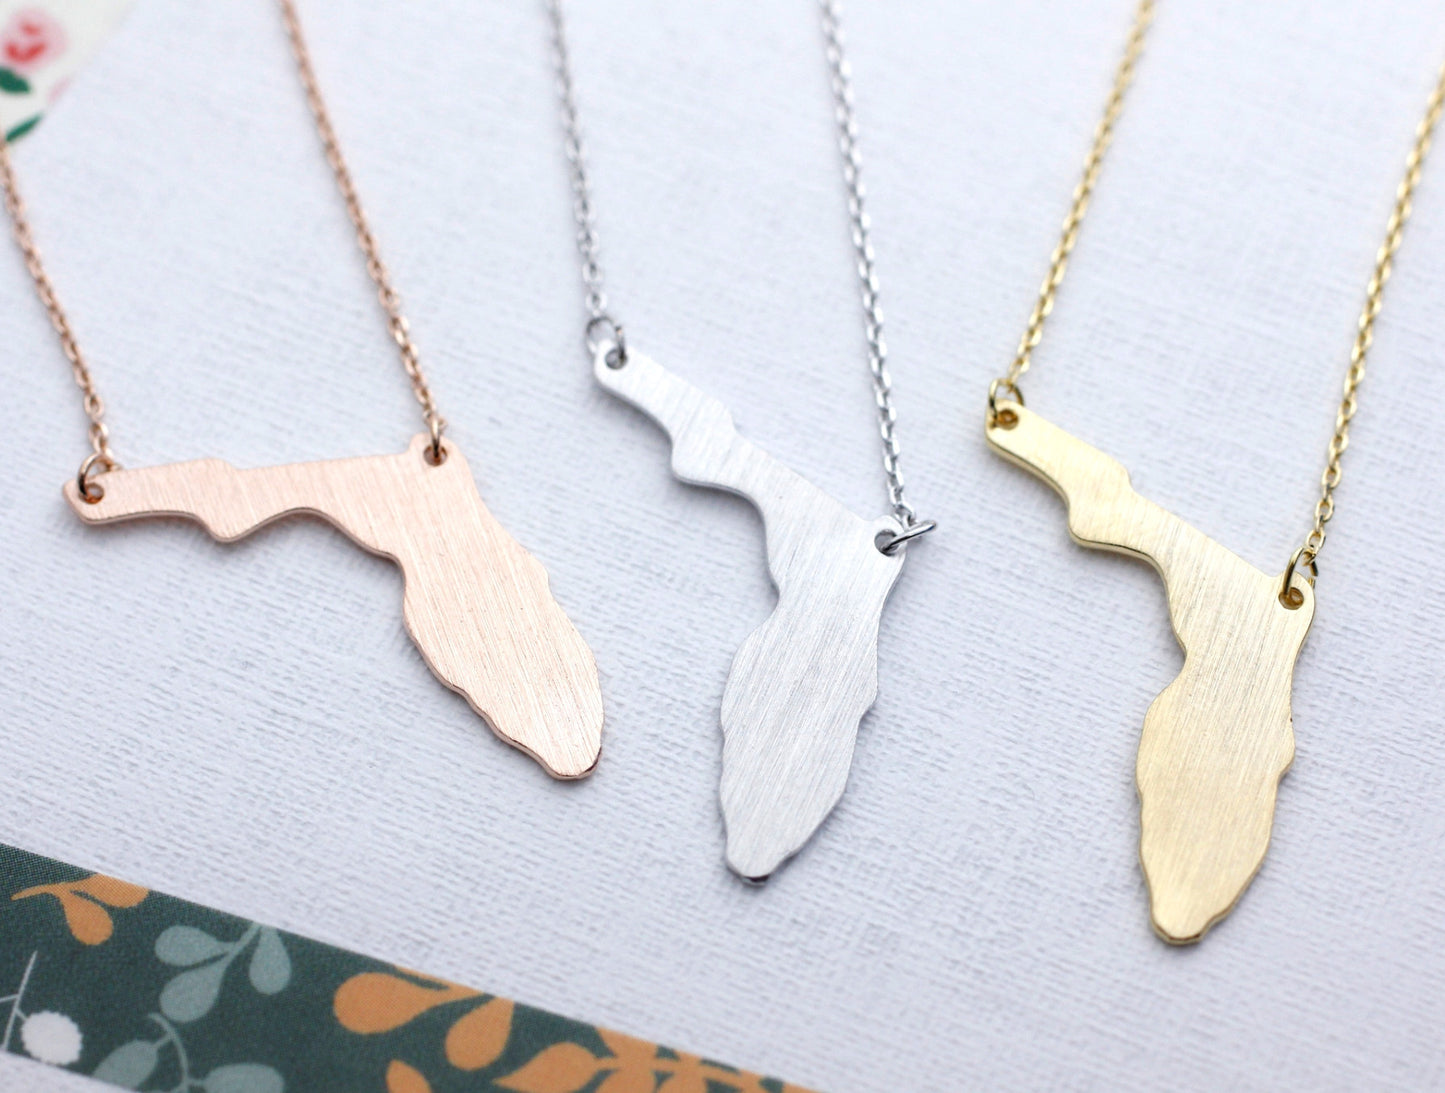 Florida (FL) necklace in gold / silver / pink gold